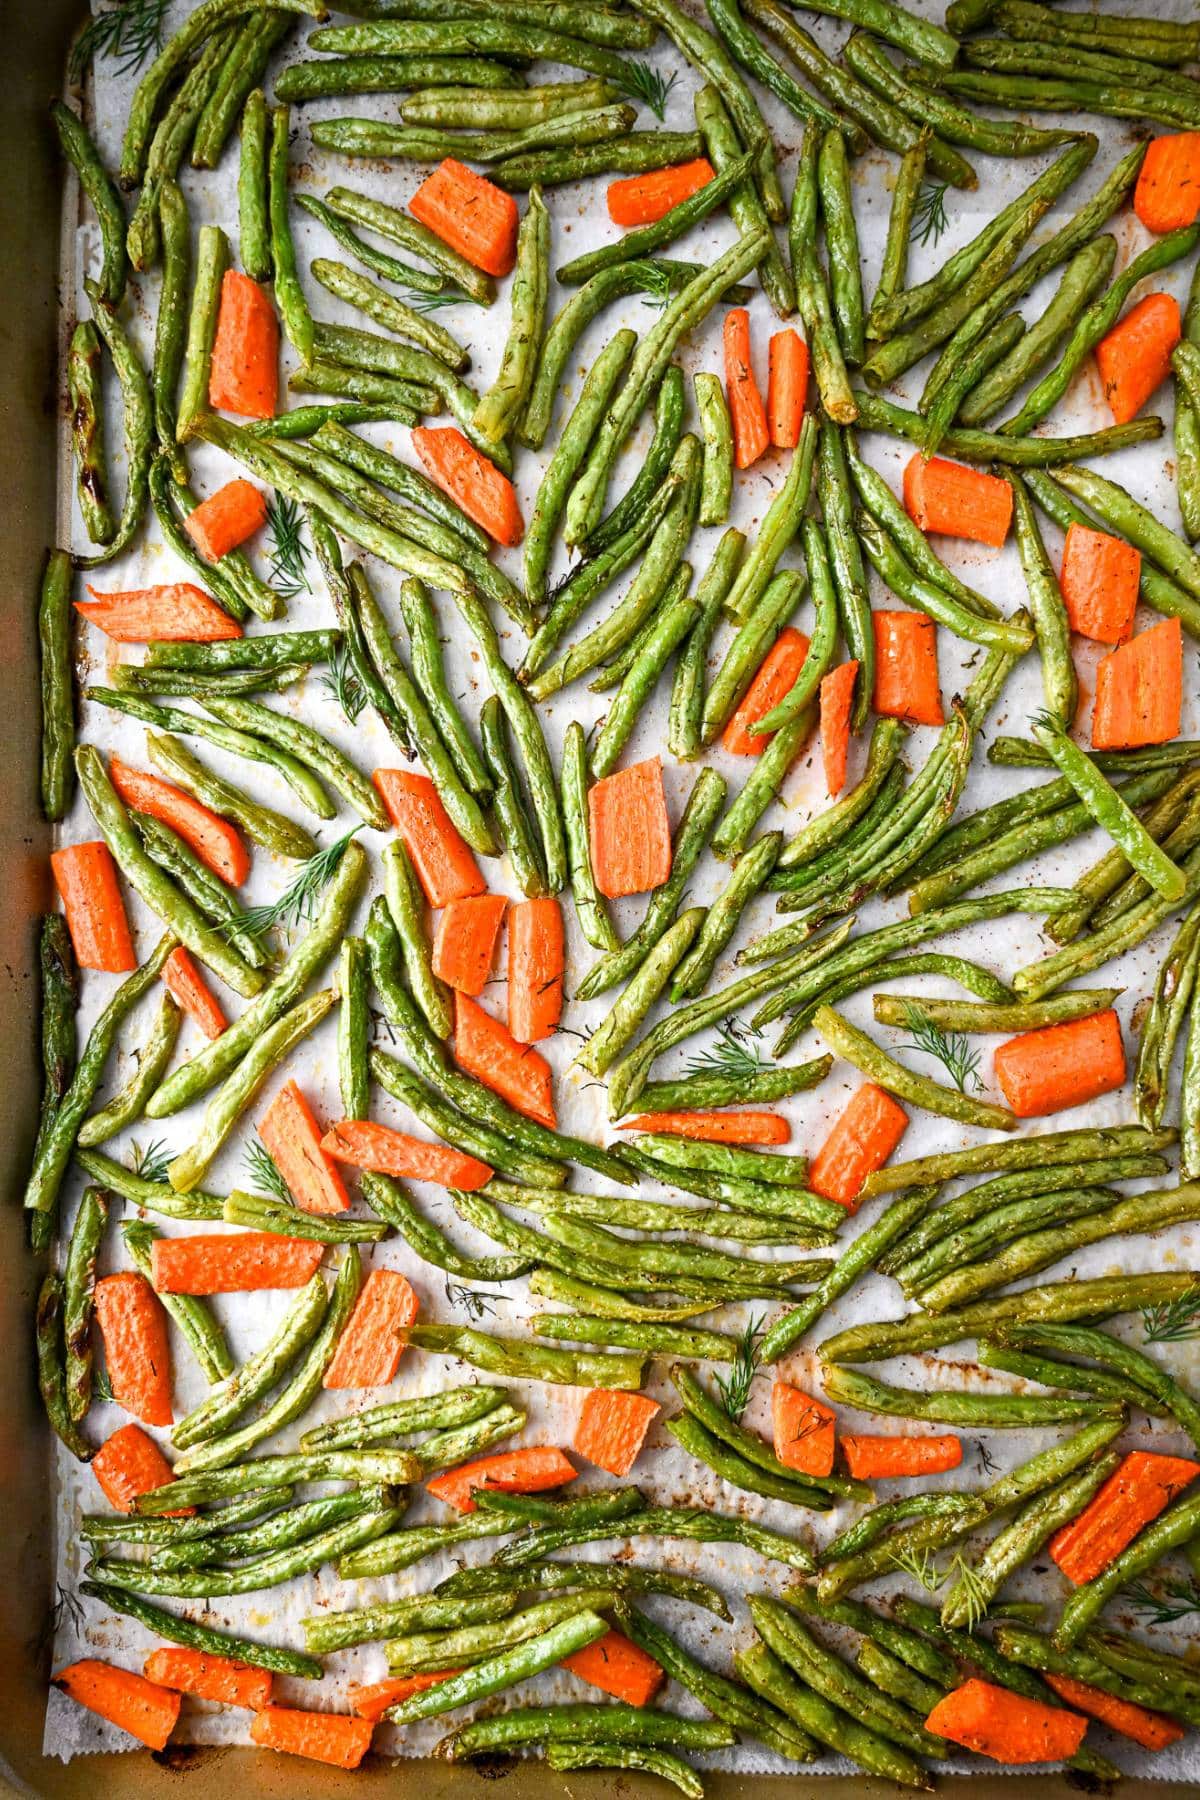 cooked green beans and carrots that were roasted on a baking sheet